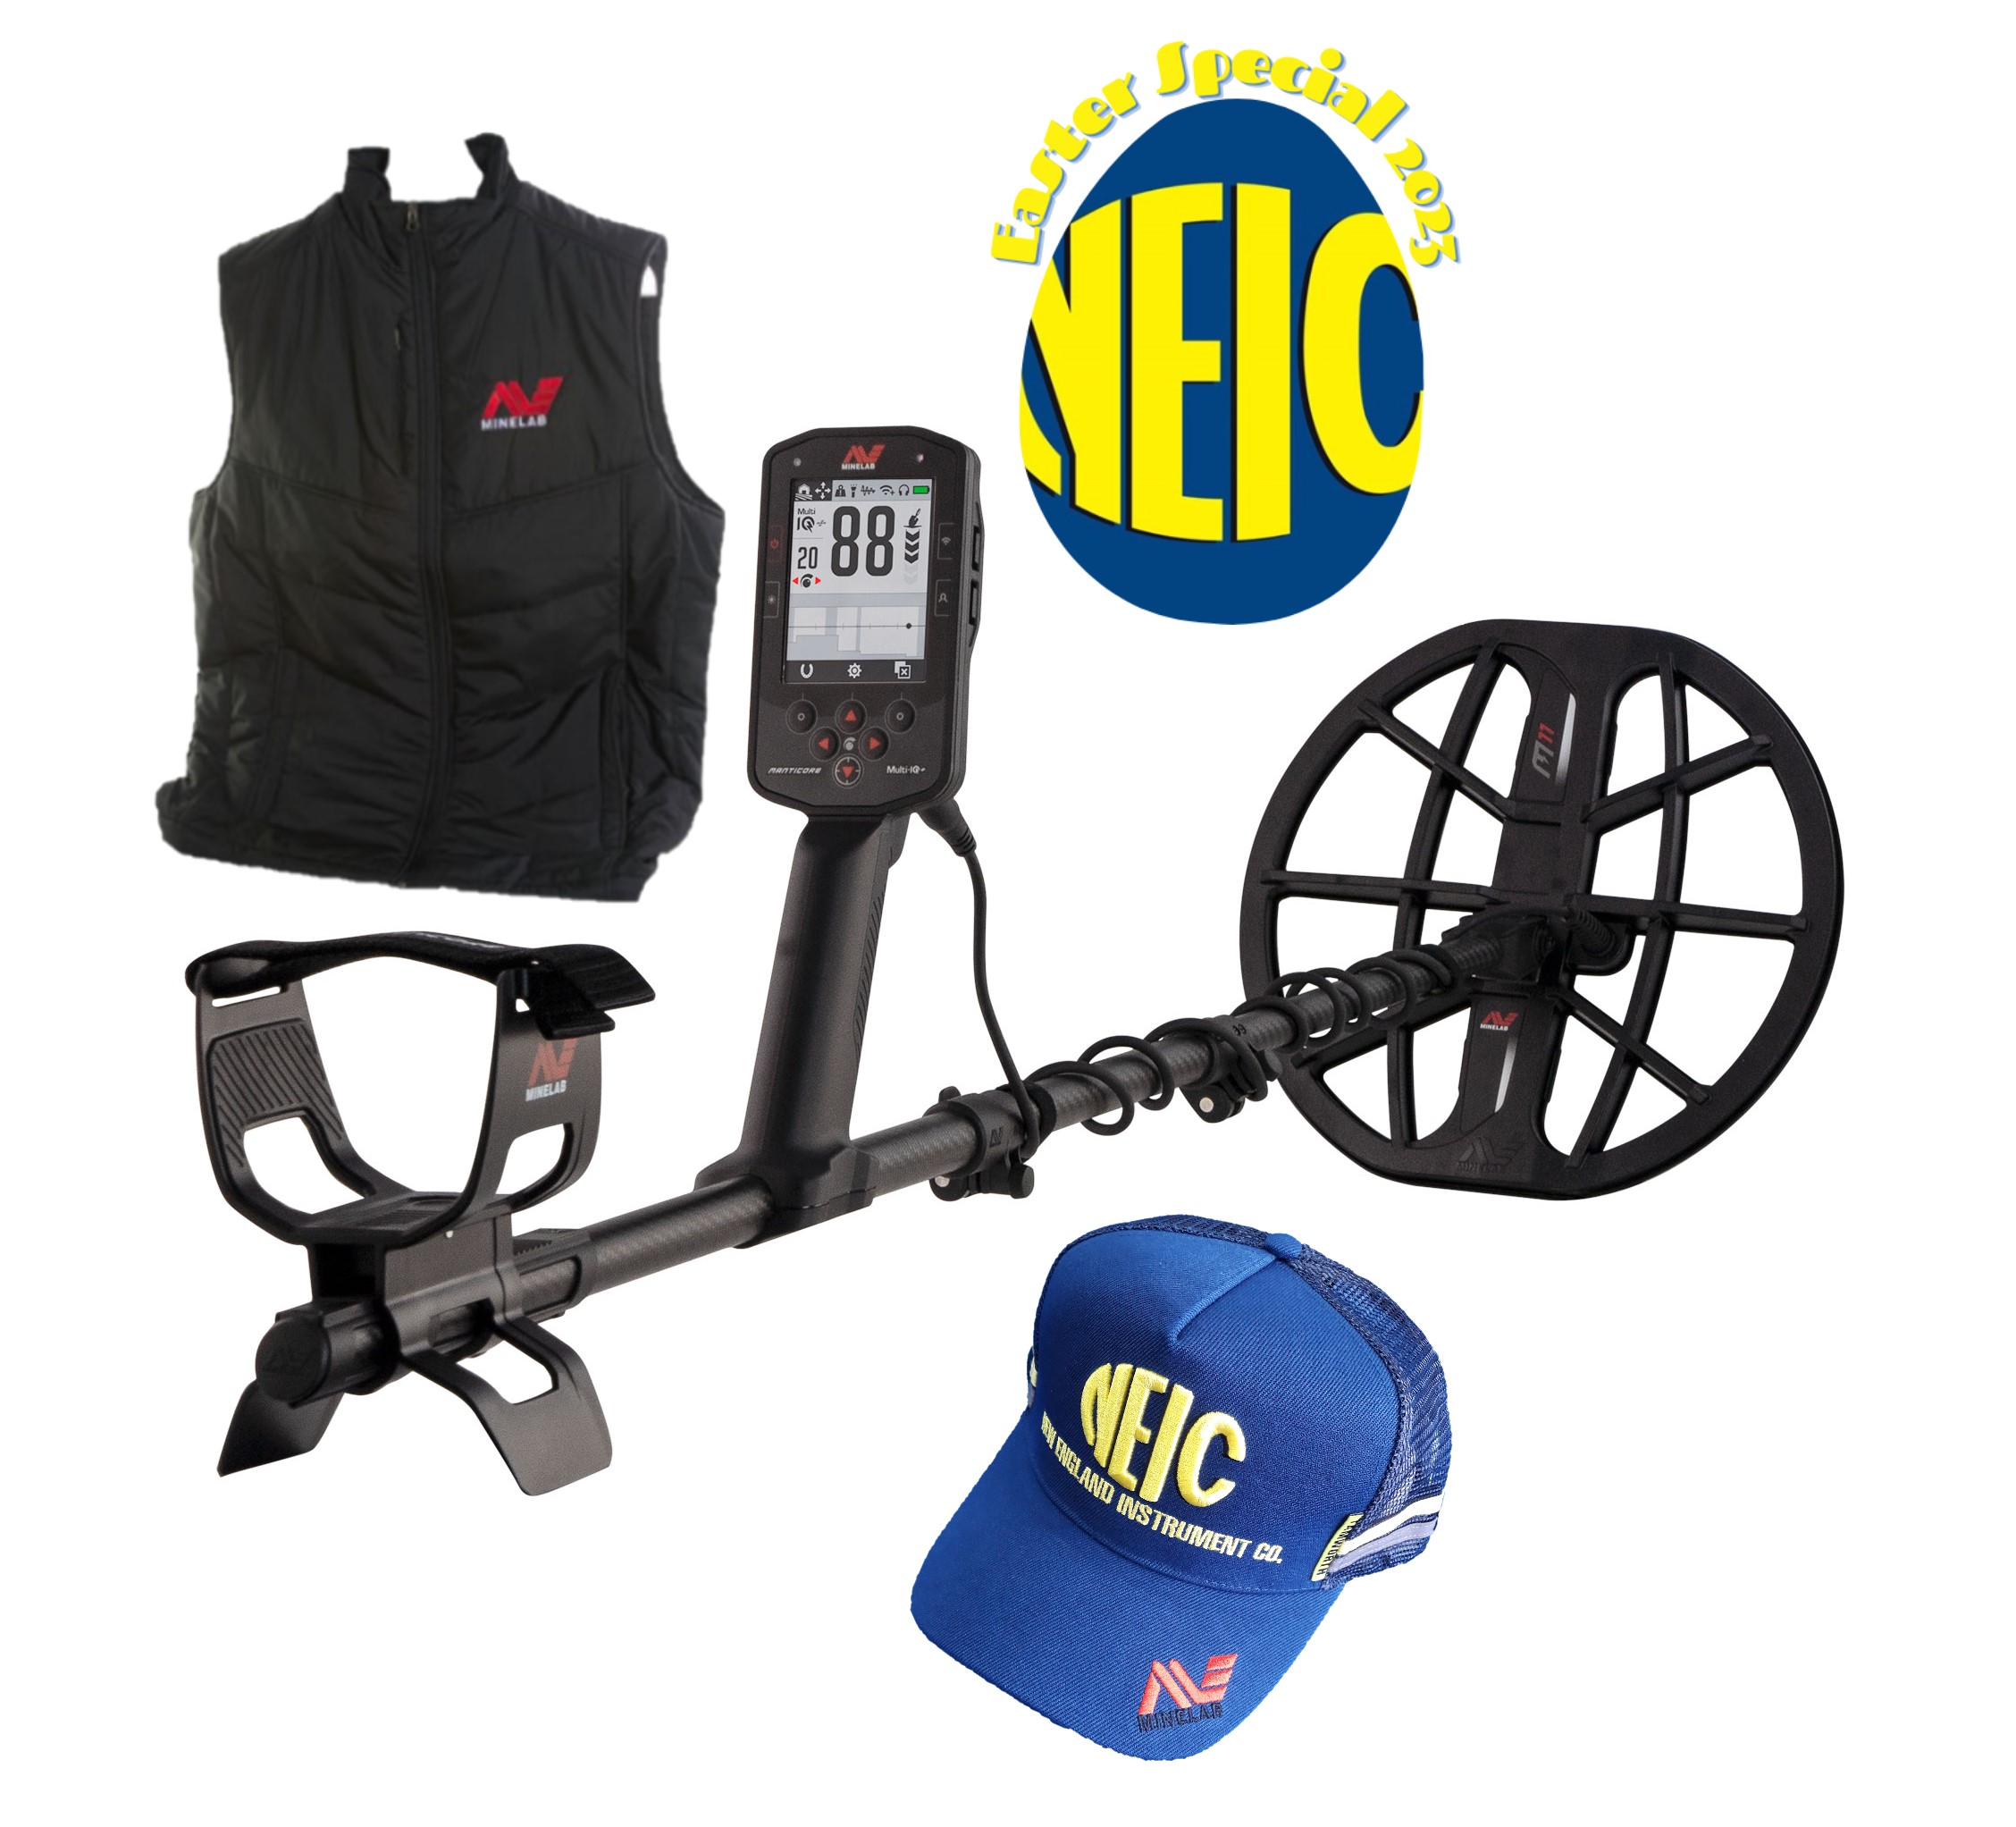 Easter Special – MINELAB MANITCORE + Minelab Puffer Vest + NEIC Cap